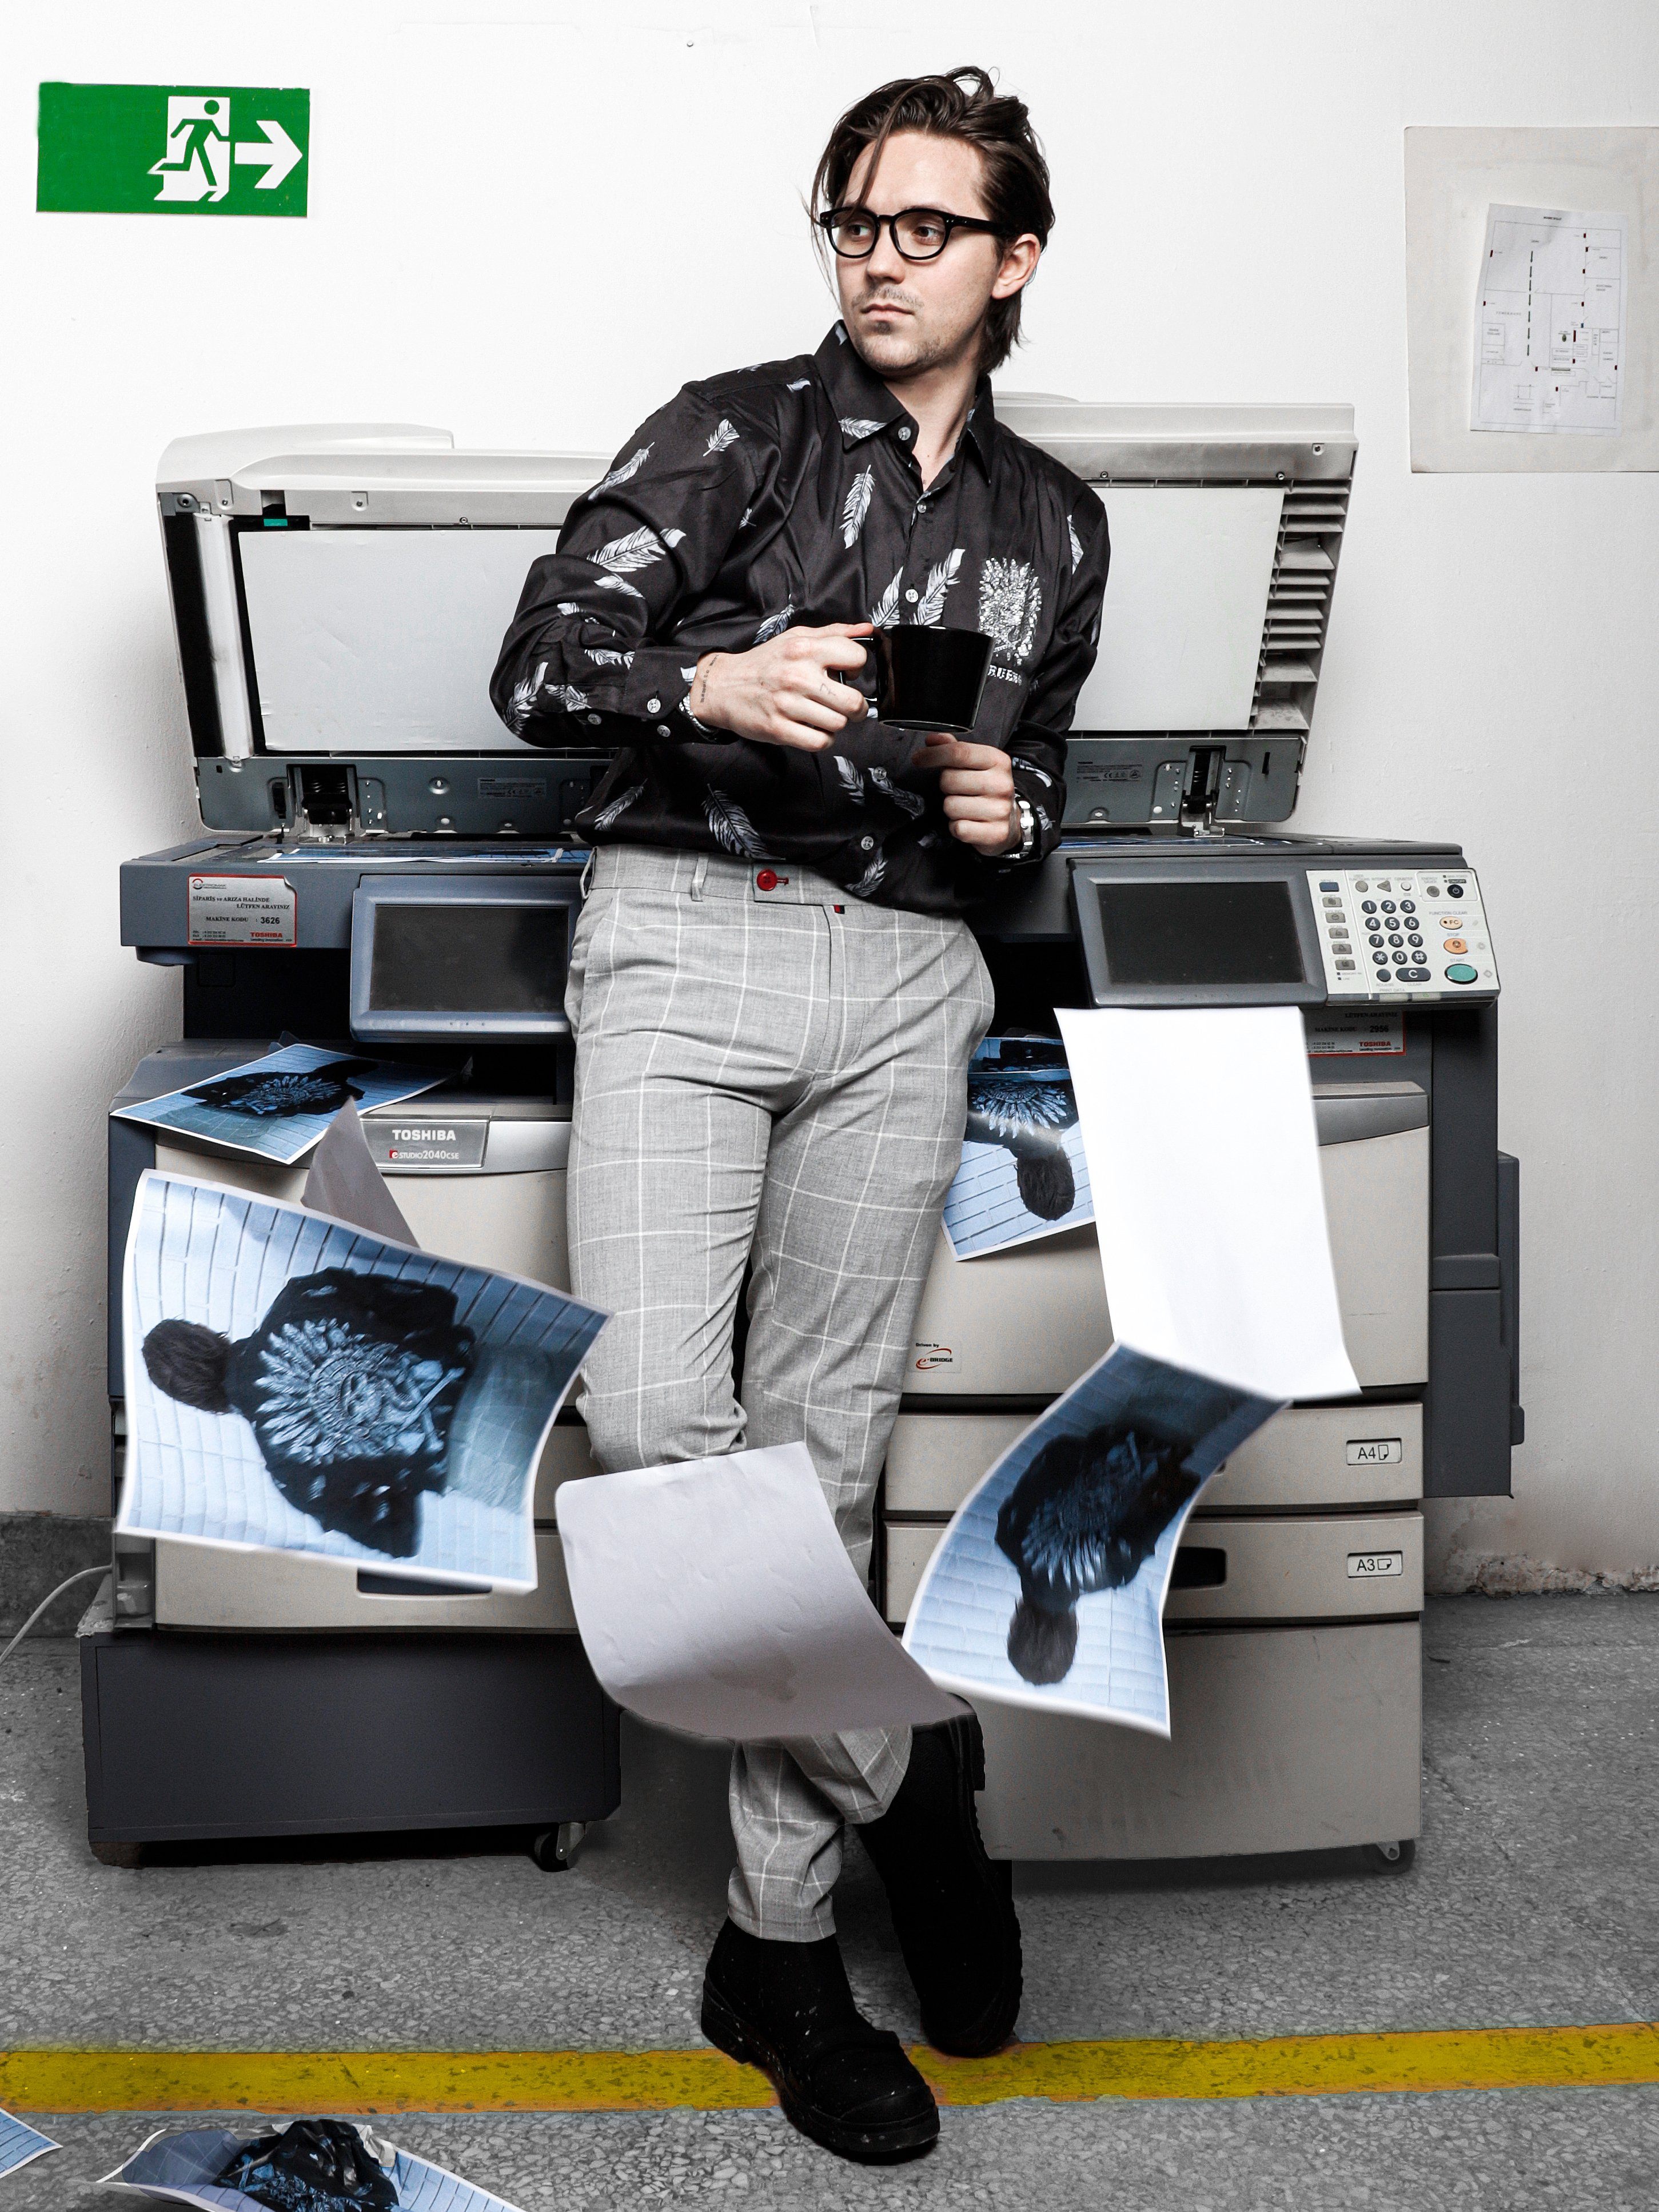 A man in ICED AMERICANO PANTS standing in front of a printer.